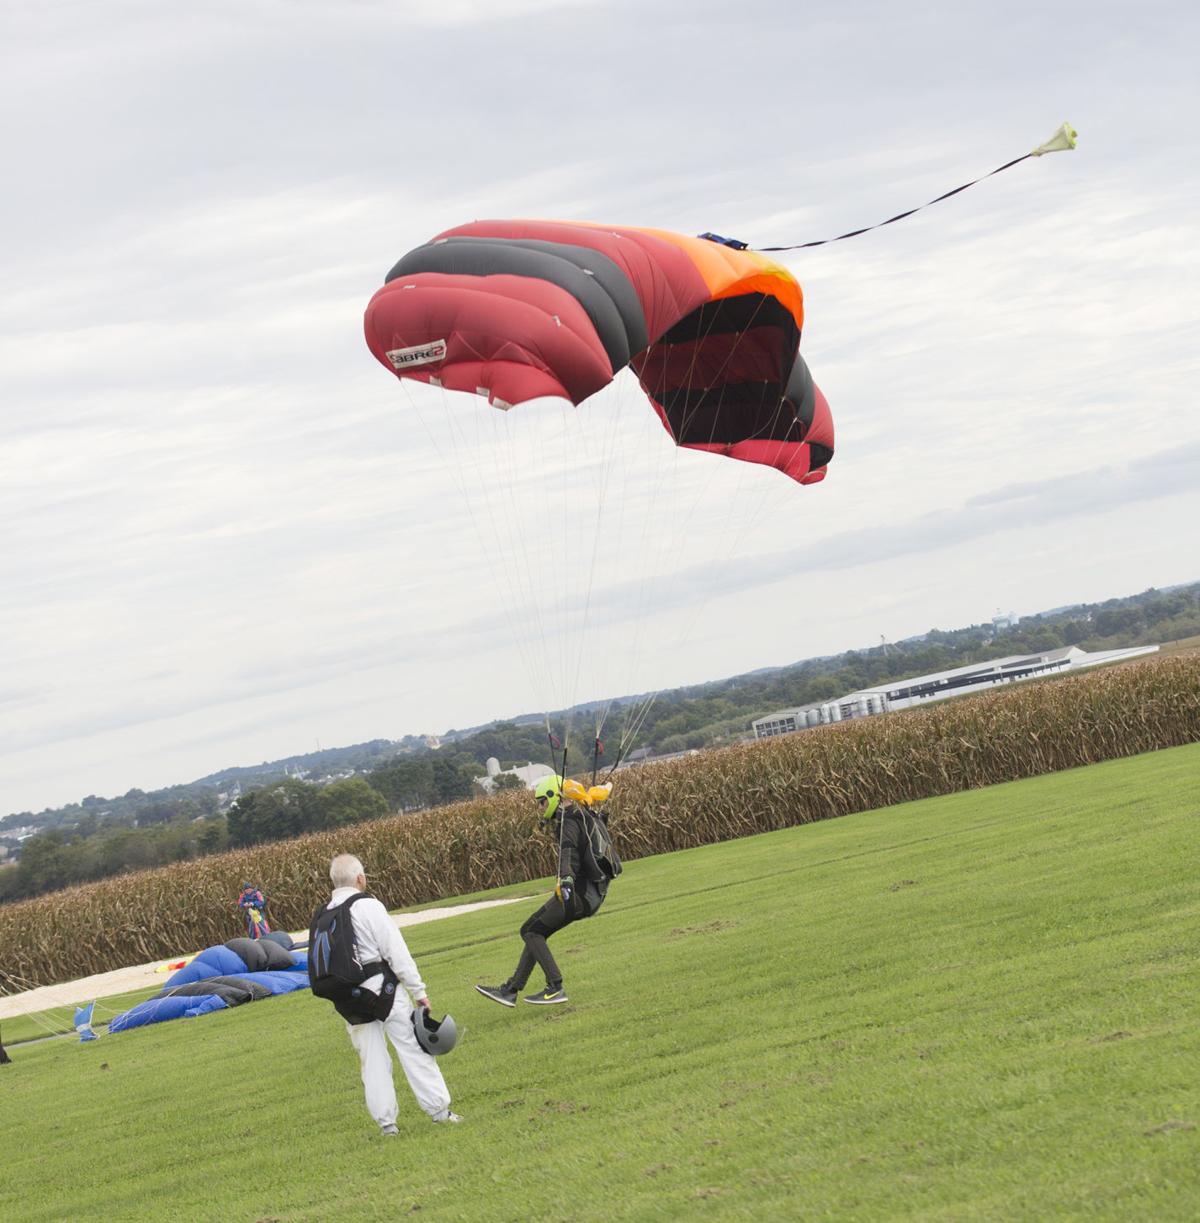 Maytown Sport Parachute Club marks 50 years as family of friends with